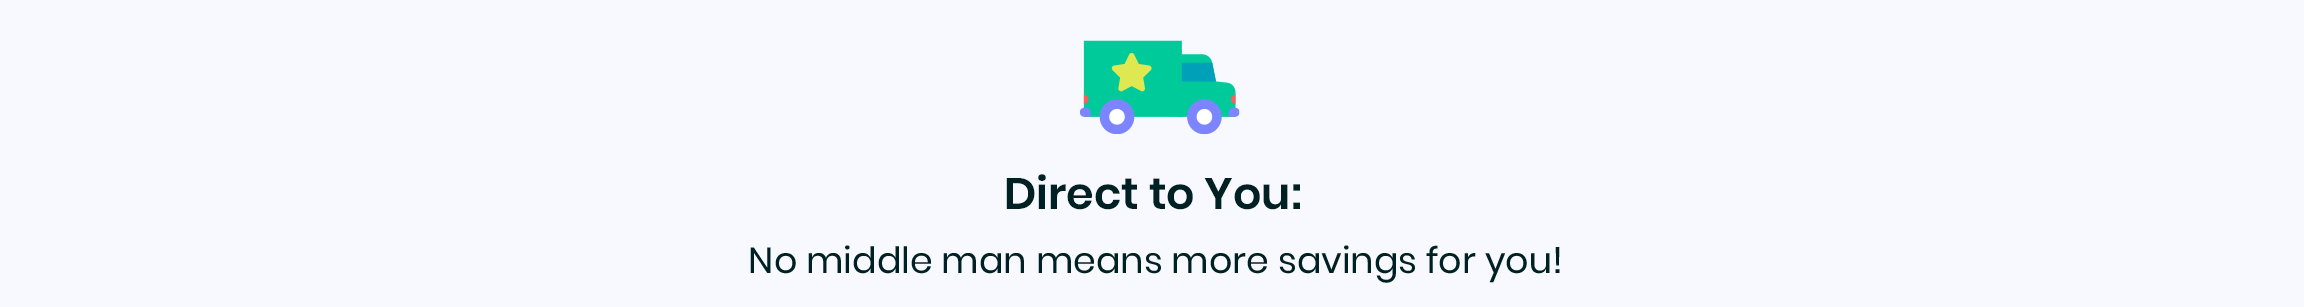 Direct to You: No middle man means more savings for you!